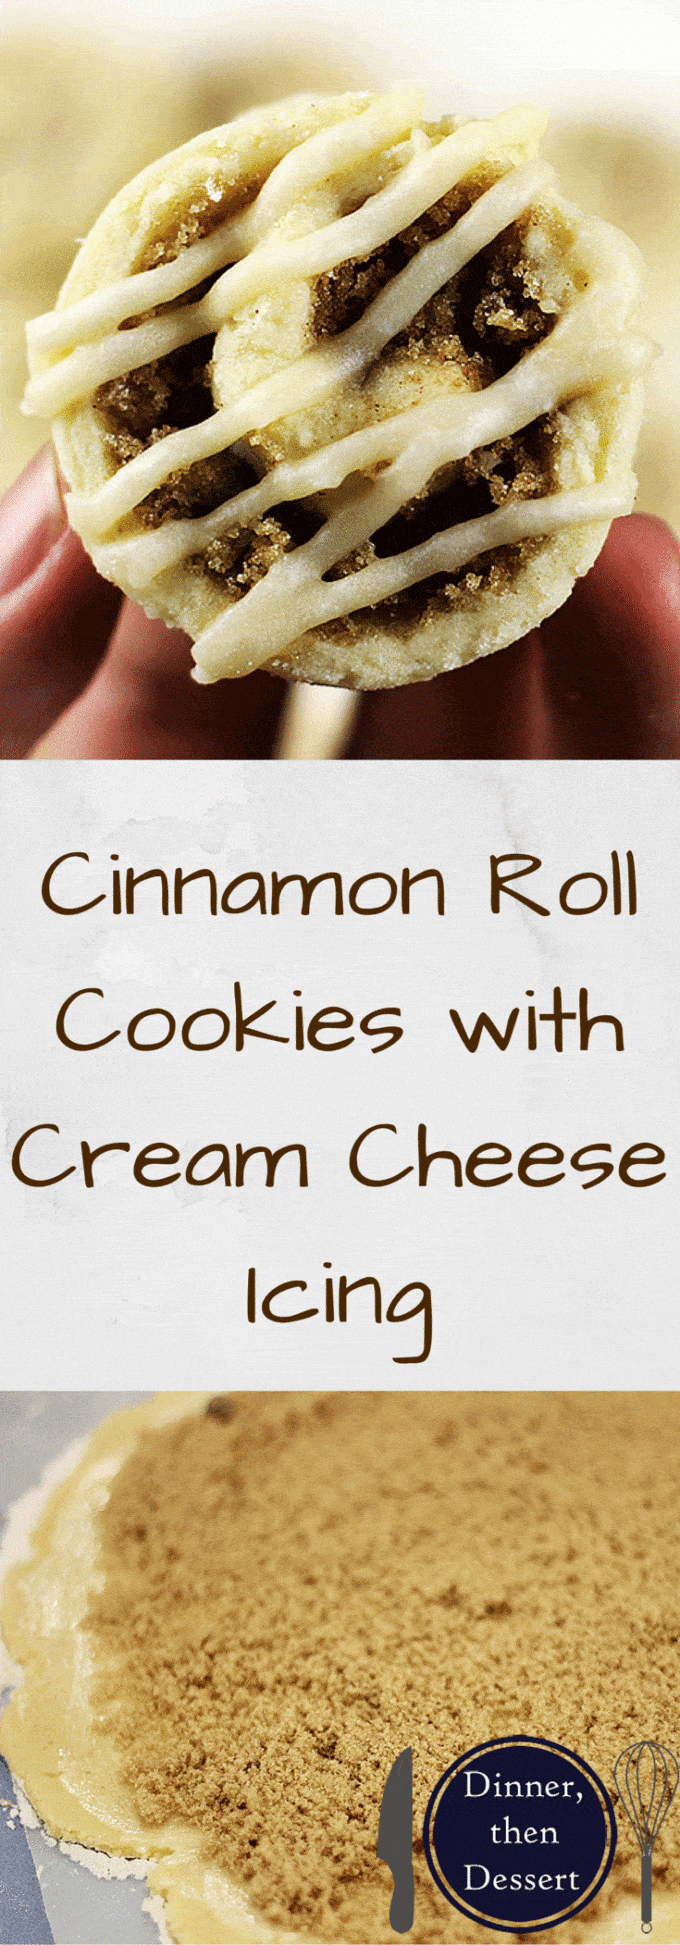 Cute little Cinnamon Roll Sugar Cookies with Cream Cheese Icing will satisfy your cinnamon roll cravings without nearly as much effort! Great for dunking in coffee!